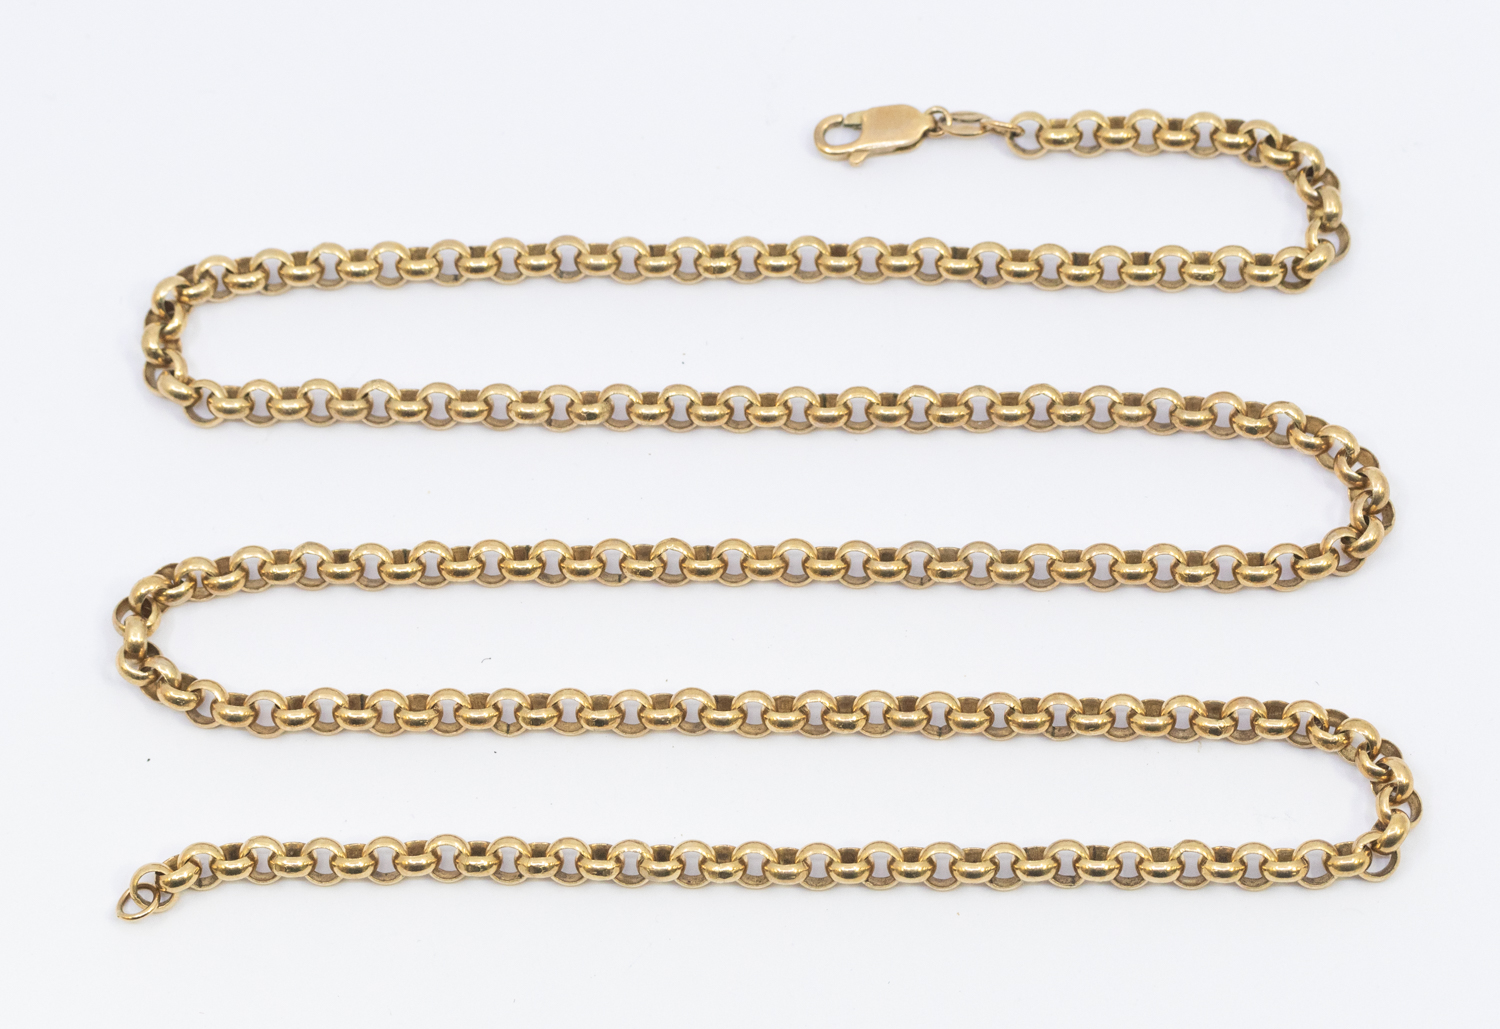 A 9ct gold belcher link chain, width approx 3.5mm, length apoprox 27'', weight approx 34gms